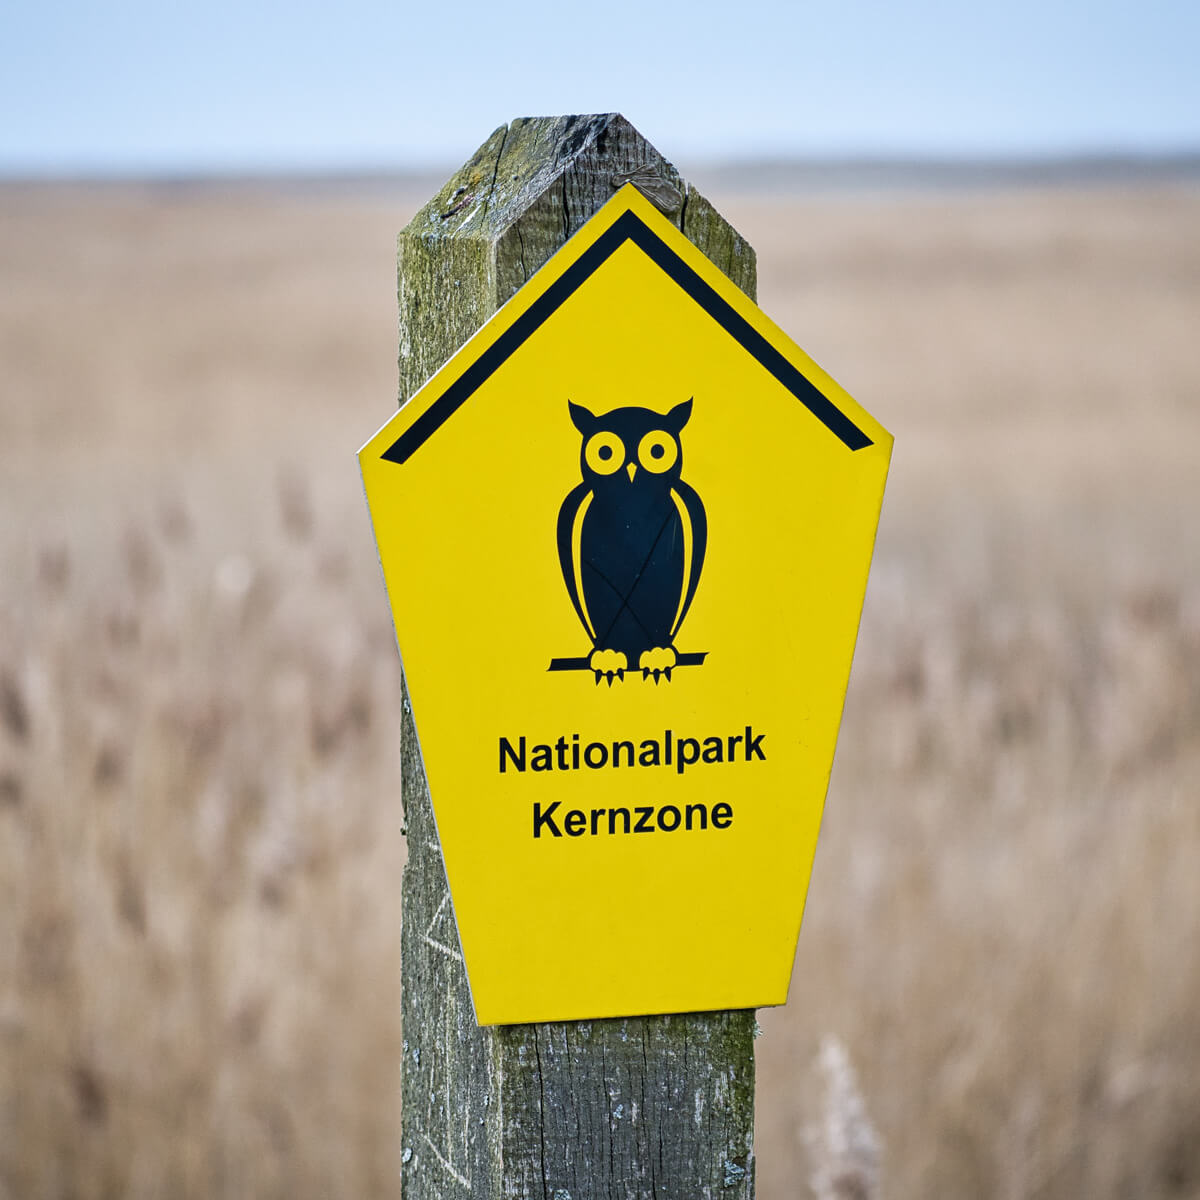 Outdoor national park pvc signs and banners by Curative Printing